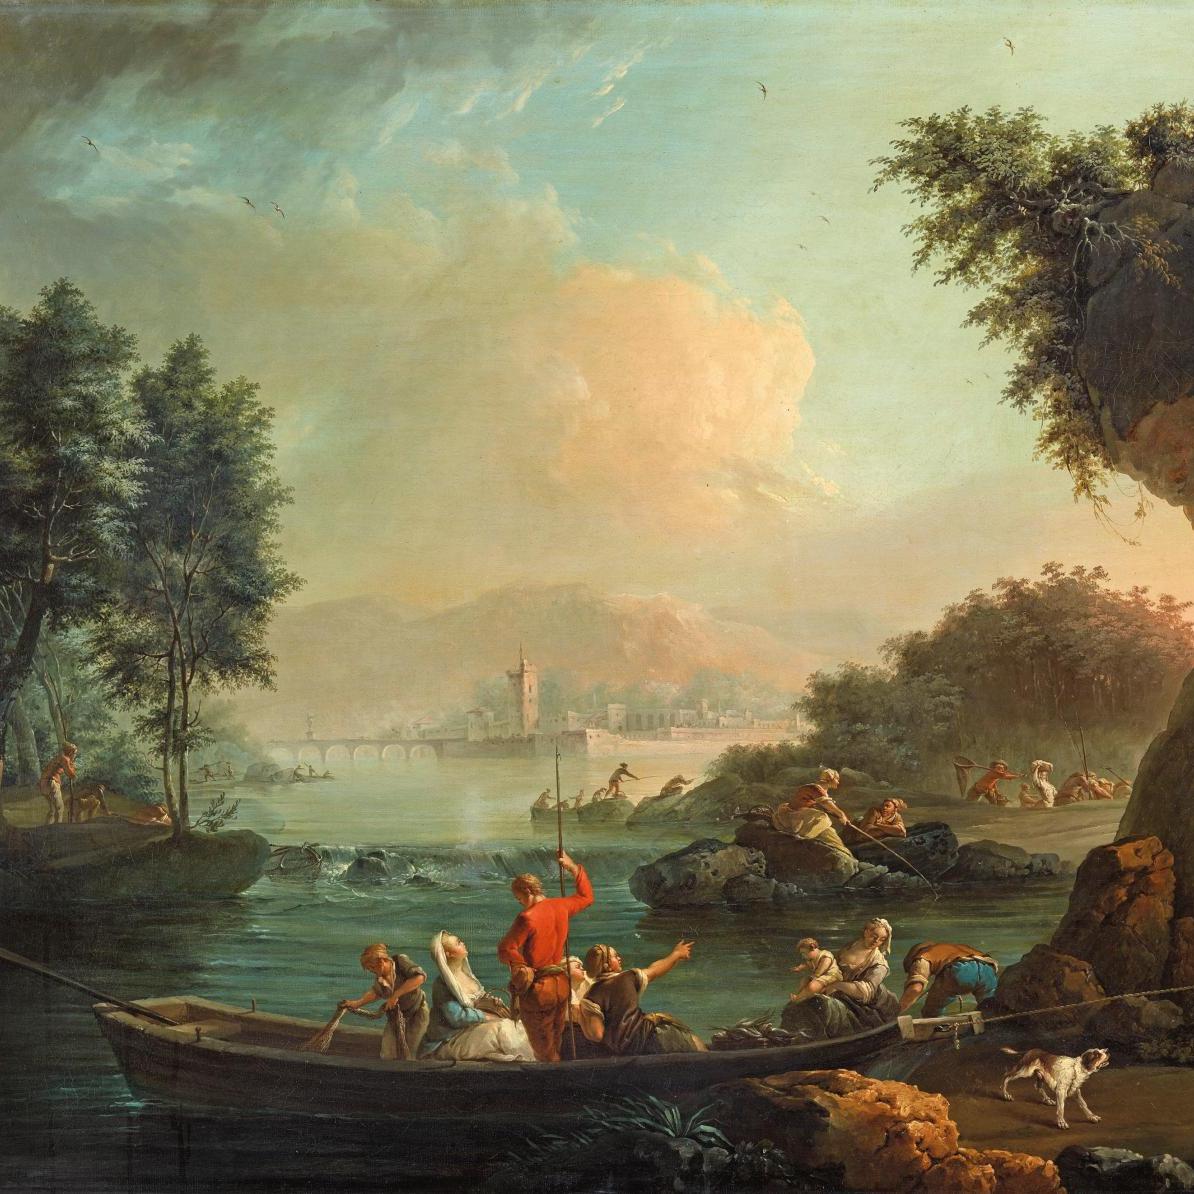 Vernet and English Connoisseurs